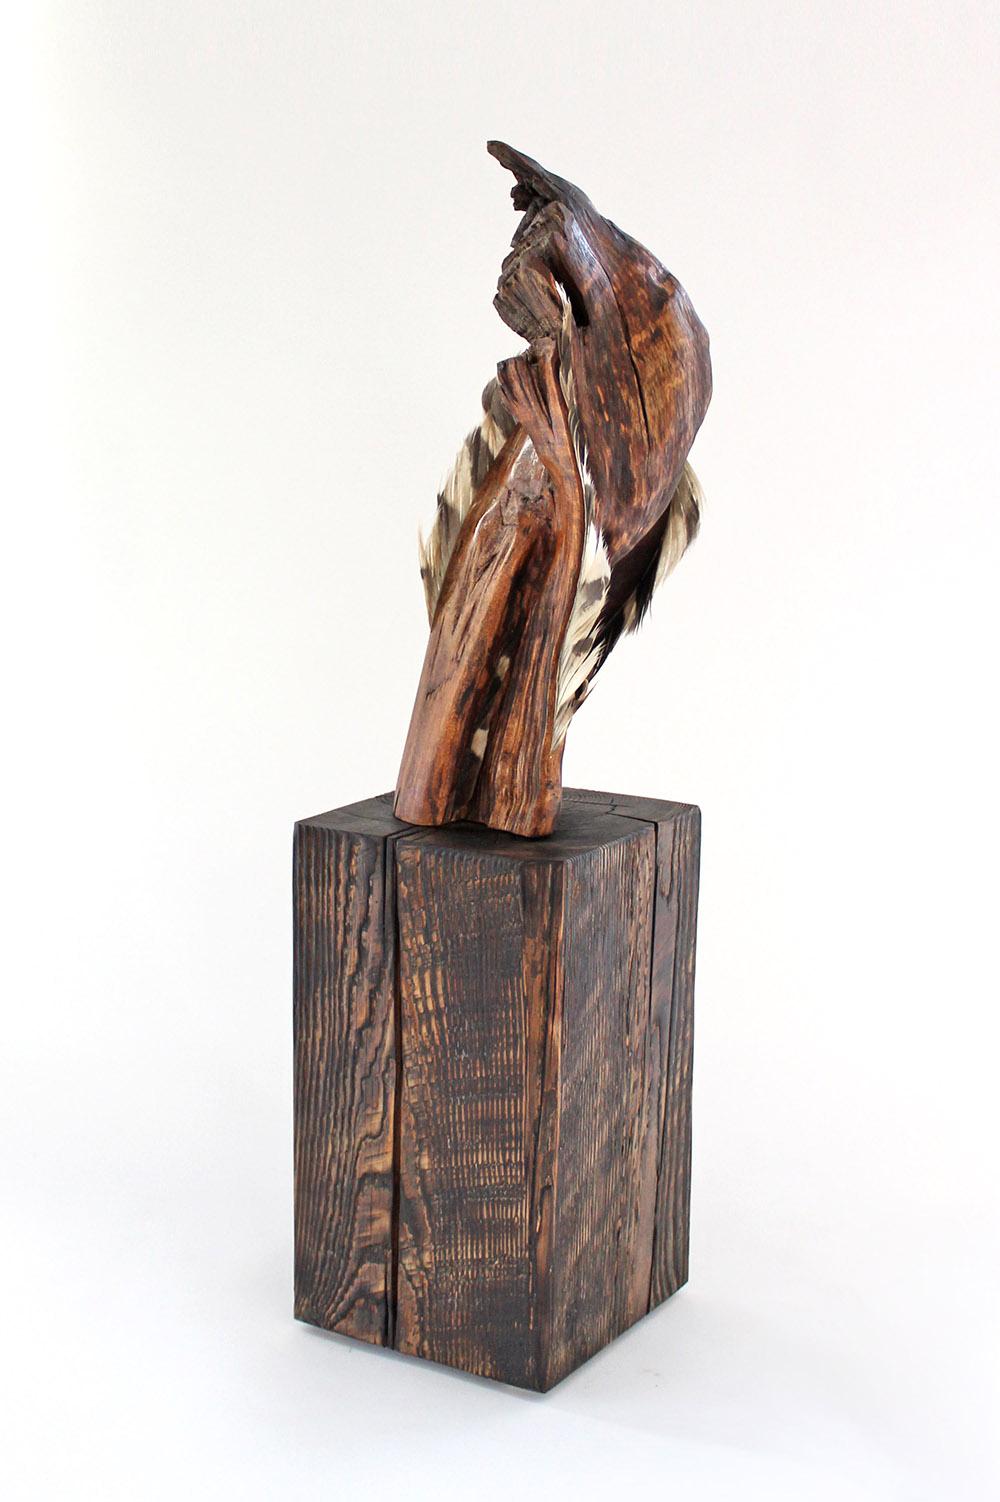 Miller Opie Abstract Sculpture - "Twisting Reverie", gestural, wood, feather, browns, reds, sculpture